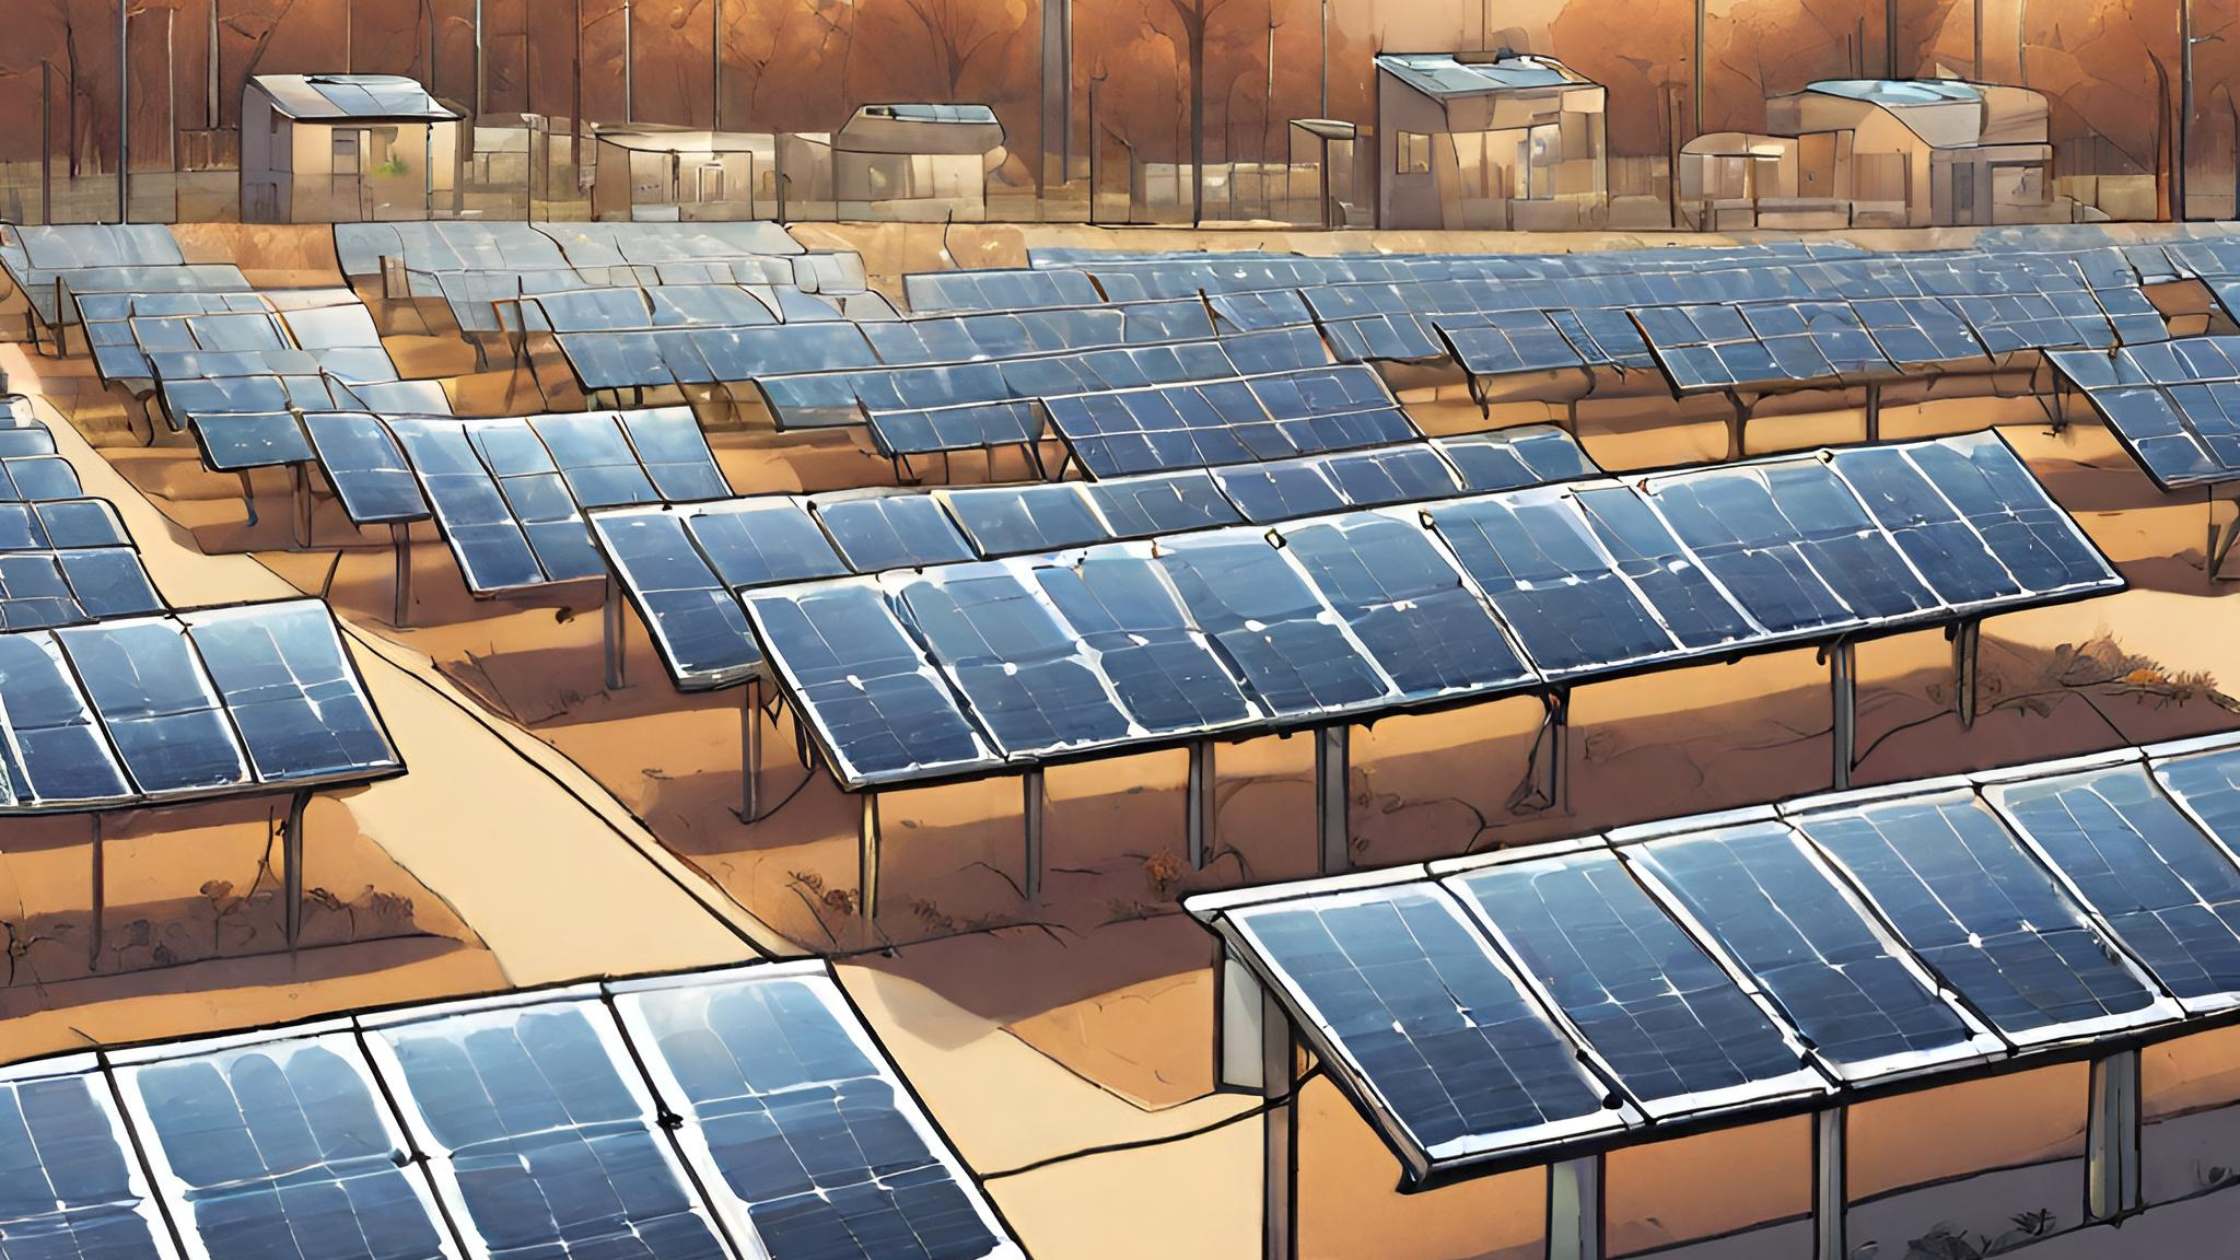 graphic representation of a community solar development that could be located in Indiana helping low and middle income Hoosiers access clean energy